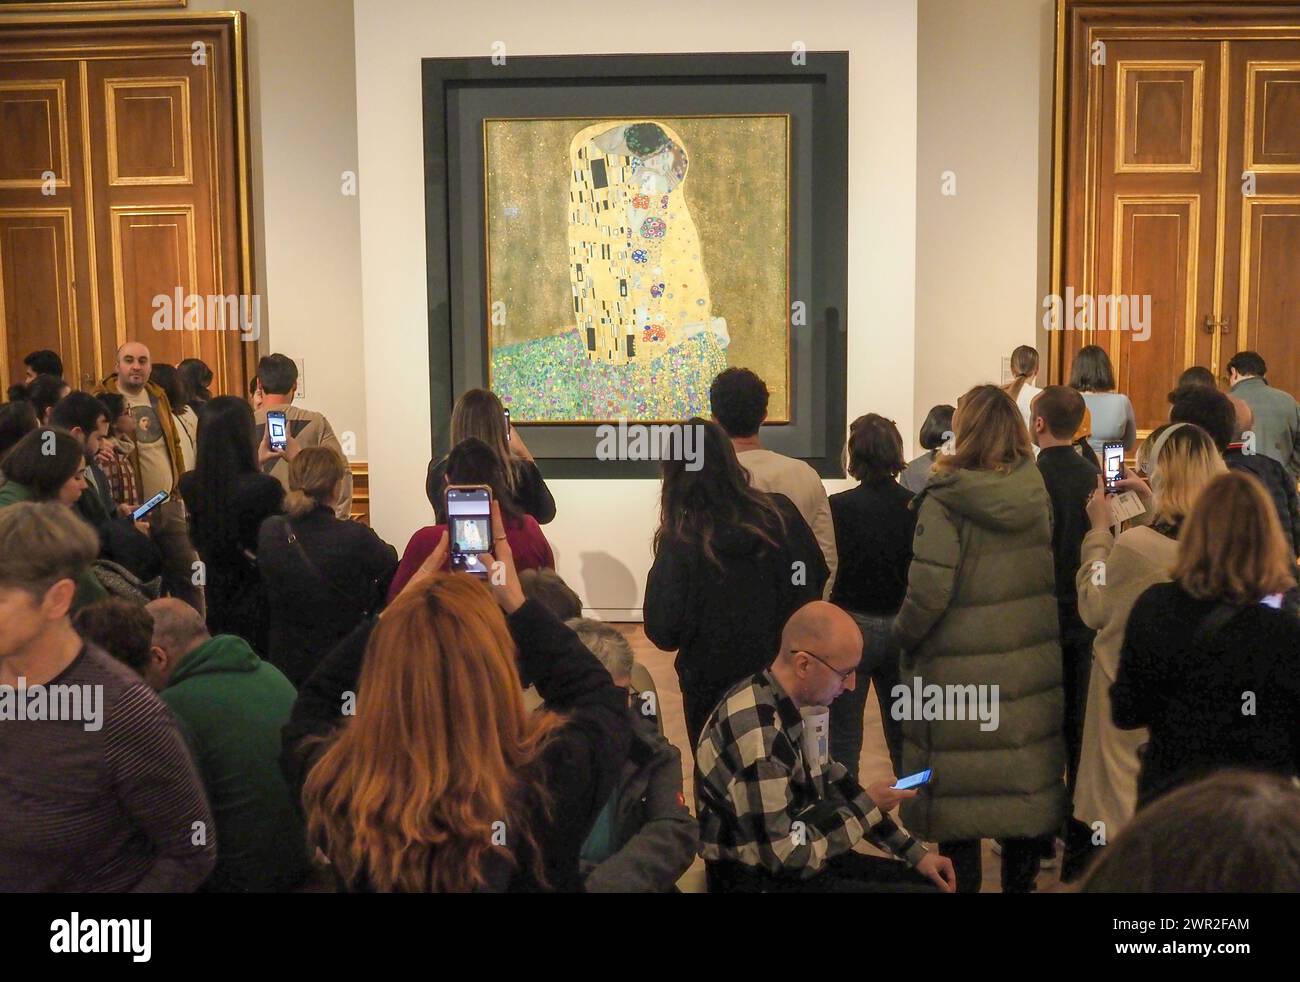 Visitors view paintings of Gustav Klimt, Kiss, 1908/1909. Belvedere museum located in palace owned by Imperial family of Austrian empire. Now in the building of Upper Belvedere there is famous art museum. Stock Photo